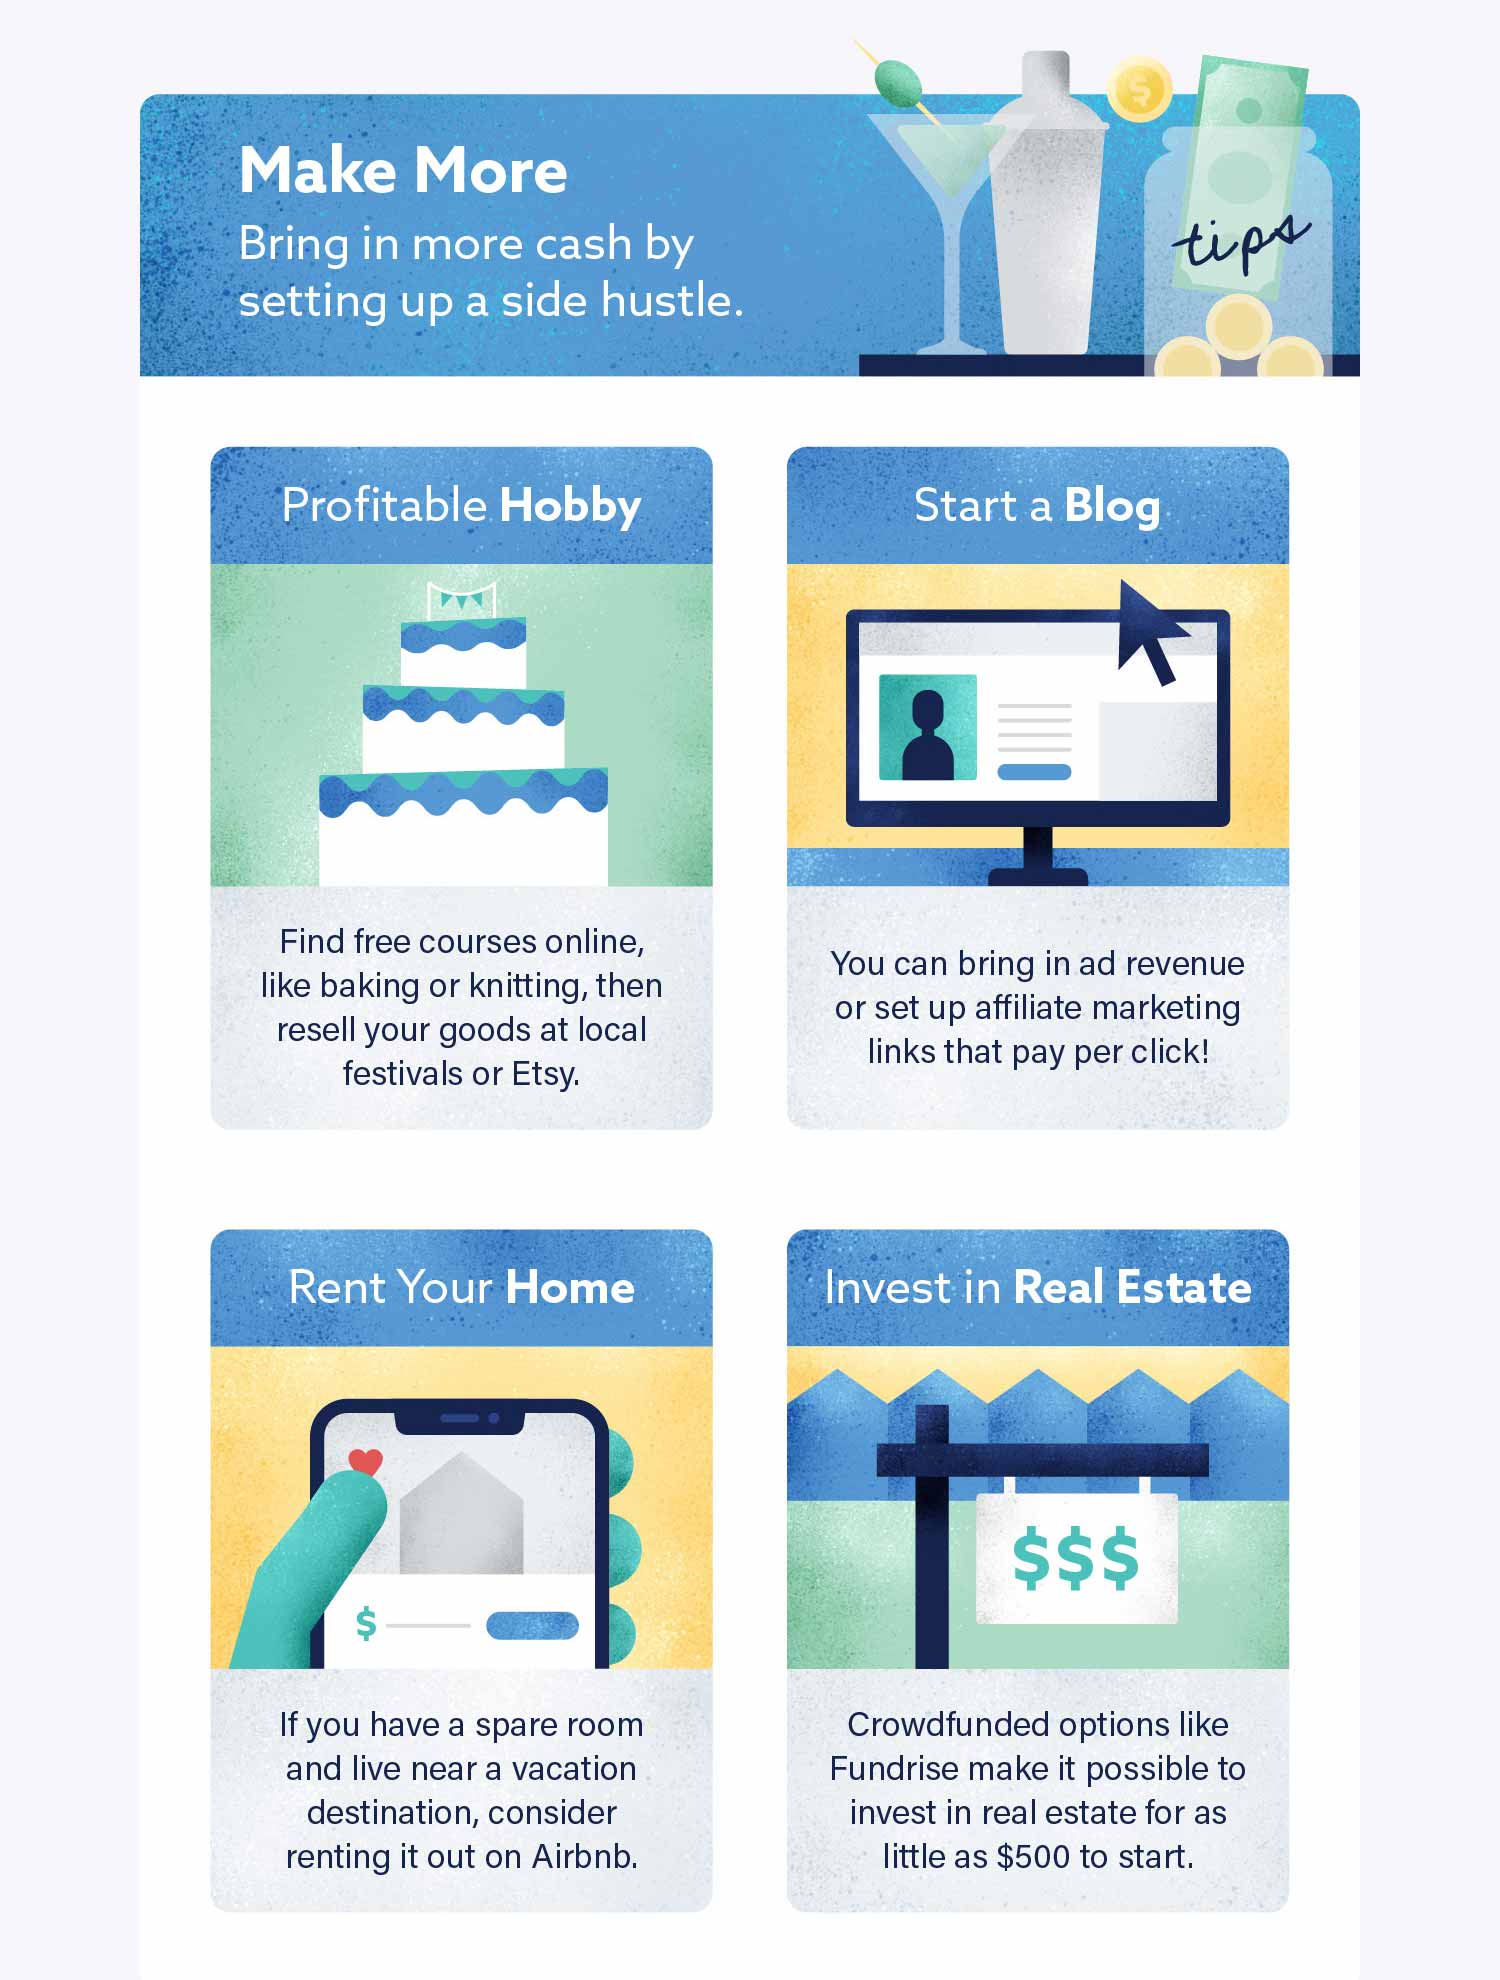 Infographic that illustrates how to start F.I.R.E (Financial Independence and Early Retirement)